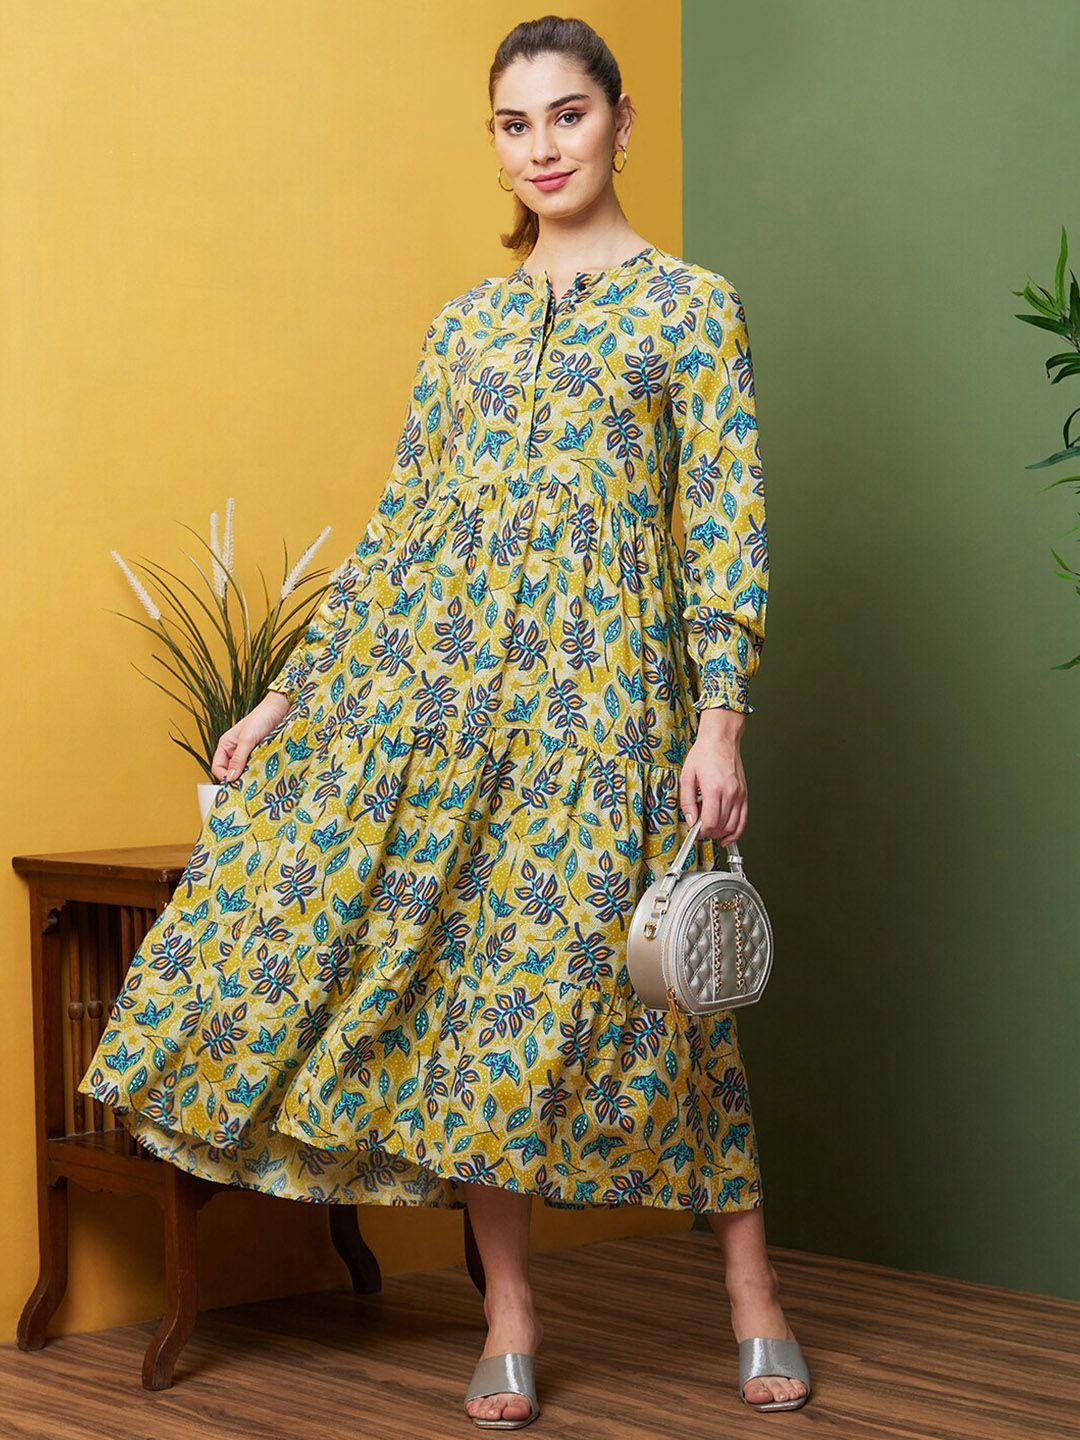 globus-women-round-neck-floral-printed-fit-and-flare-maxi-dress